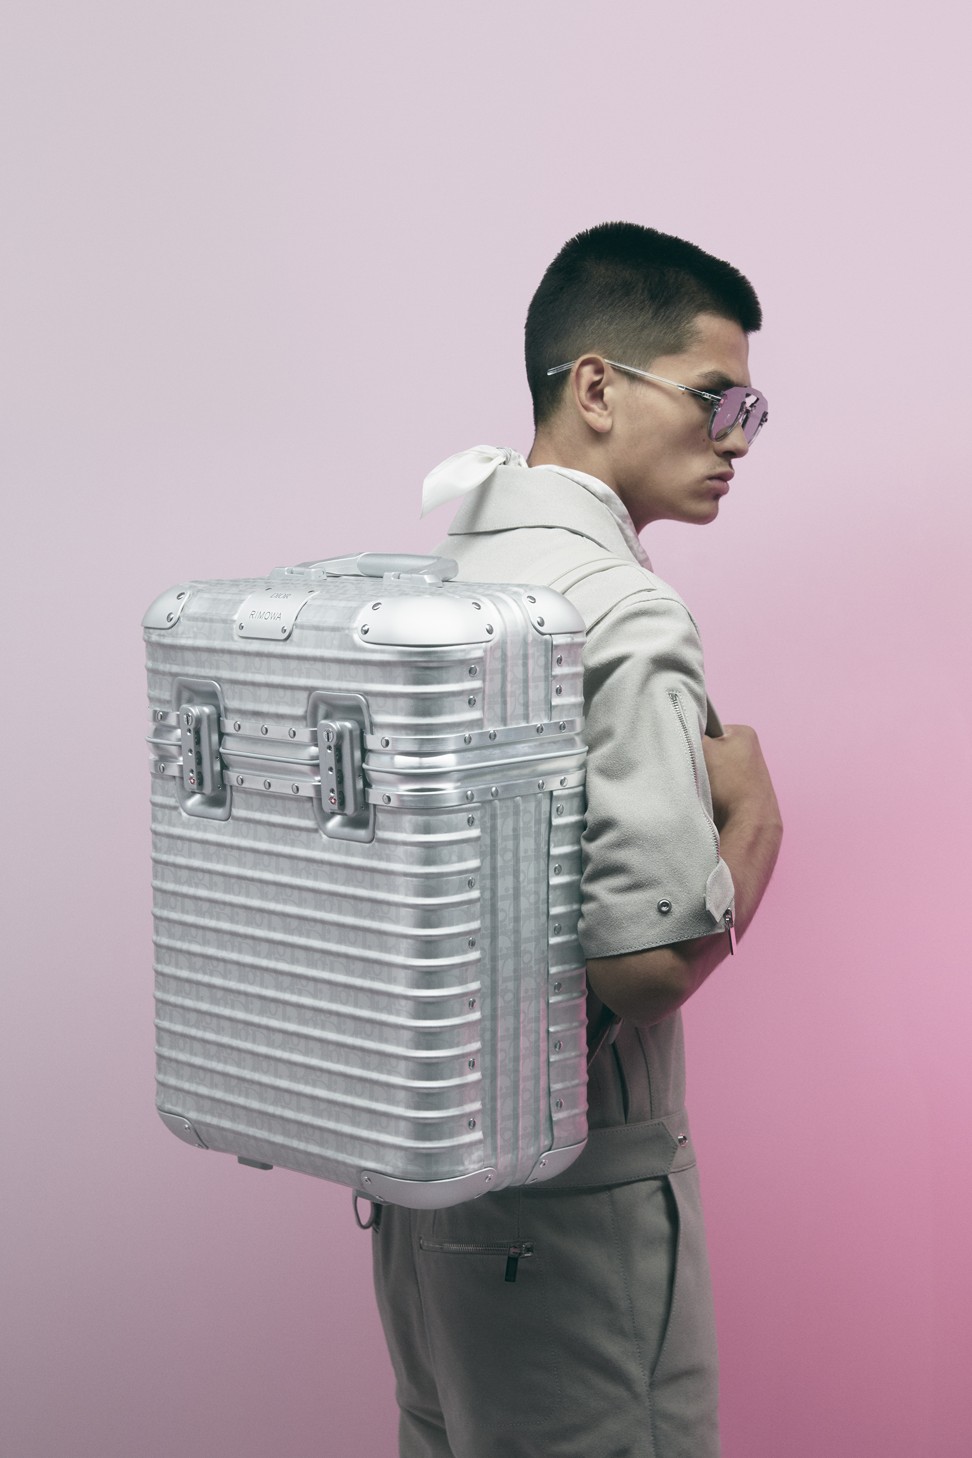 Rimowa CEO and son of LVMH head on luxury luggage brand's revamp and why  he's not targeting millennials